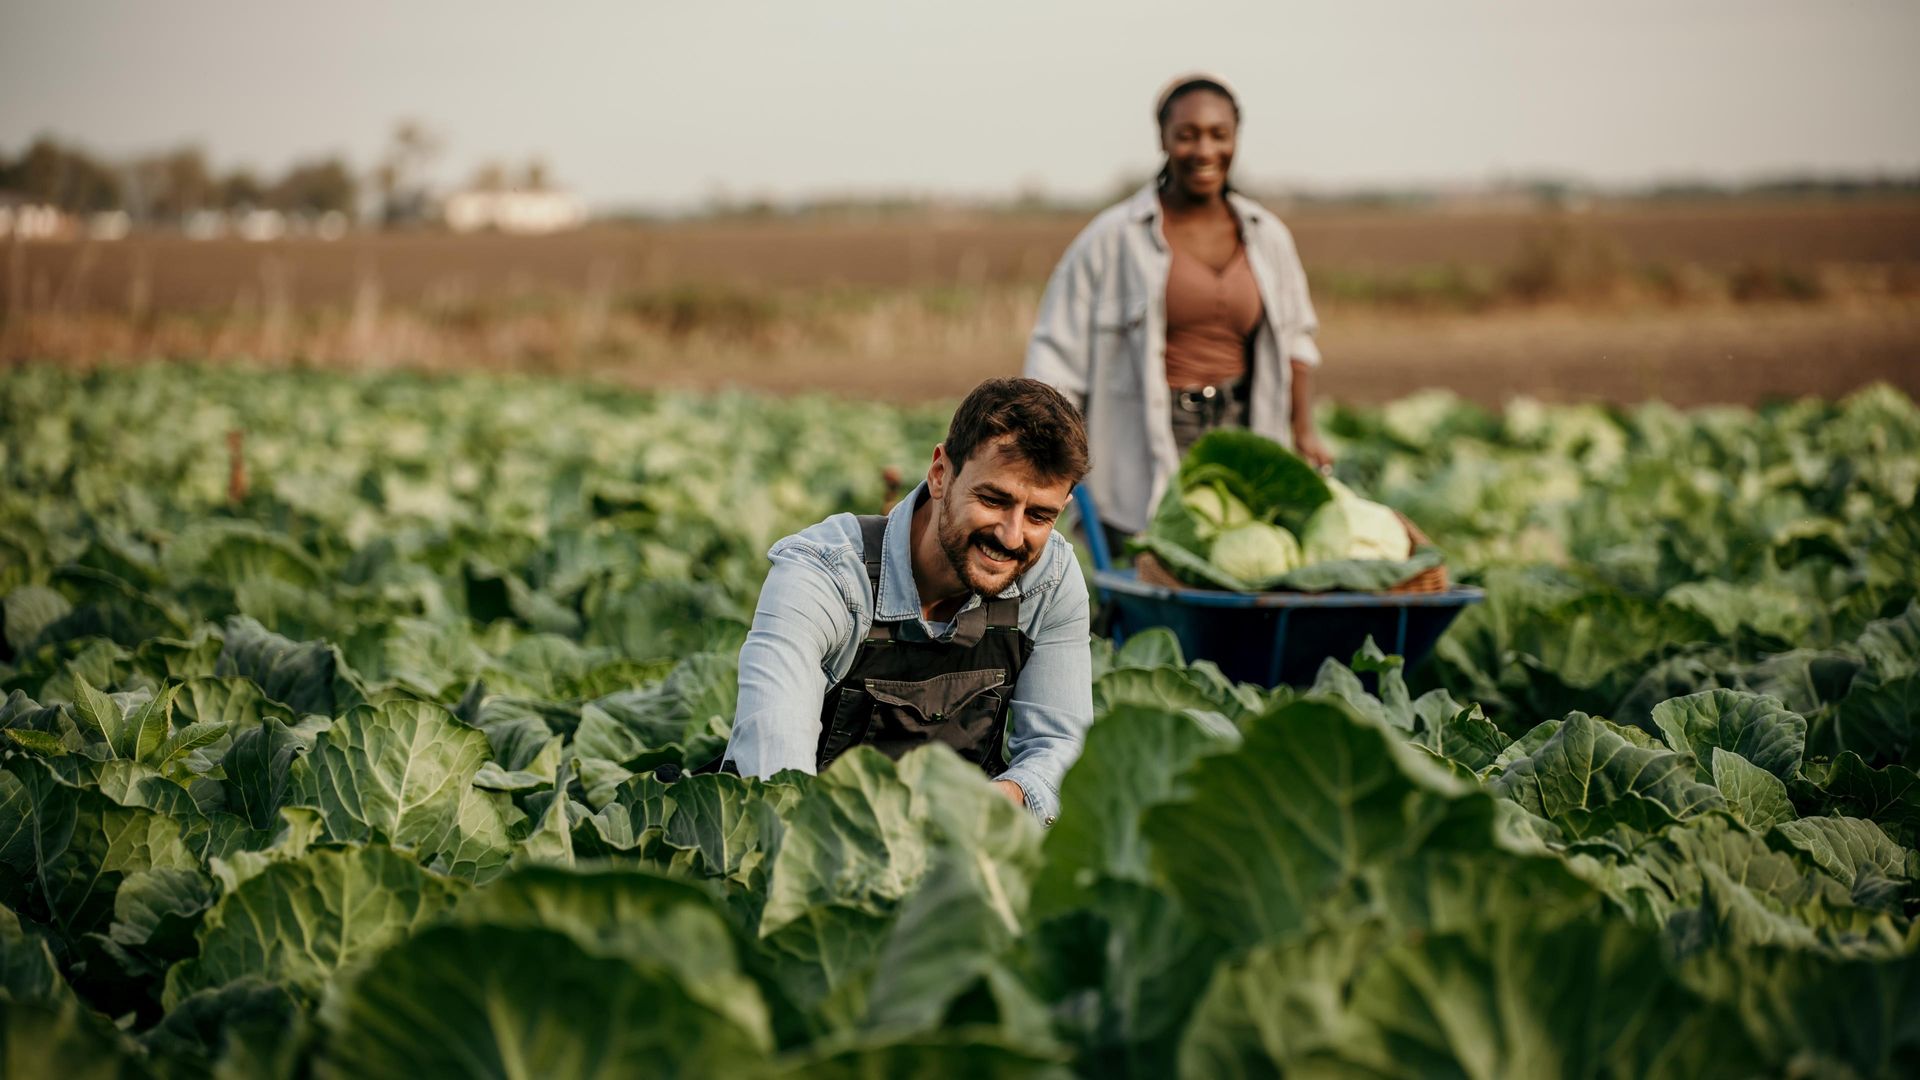 A man and woman working in a field to harvest cabbages.